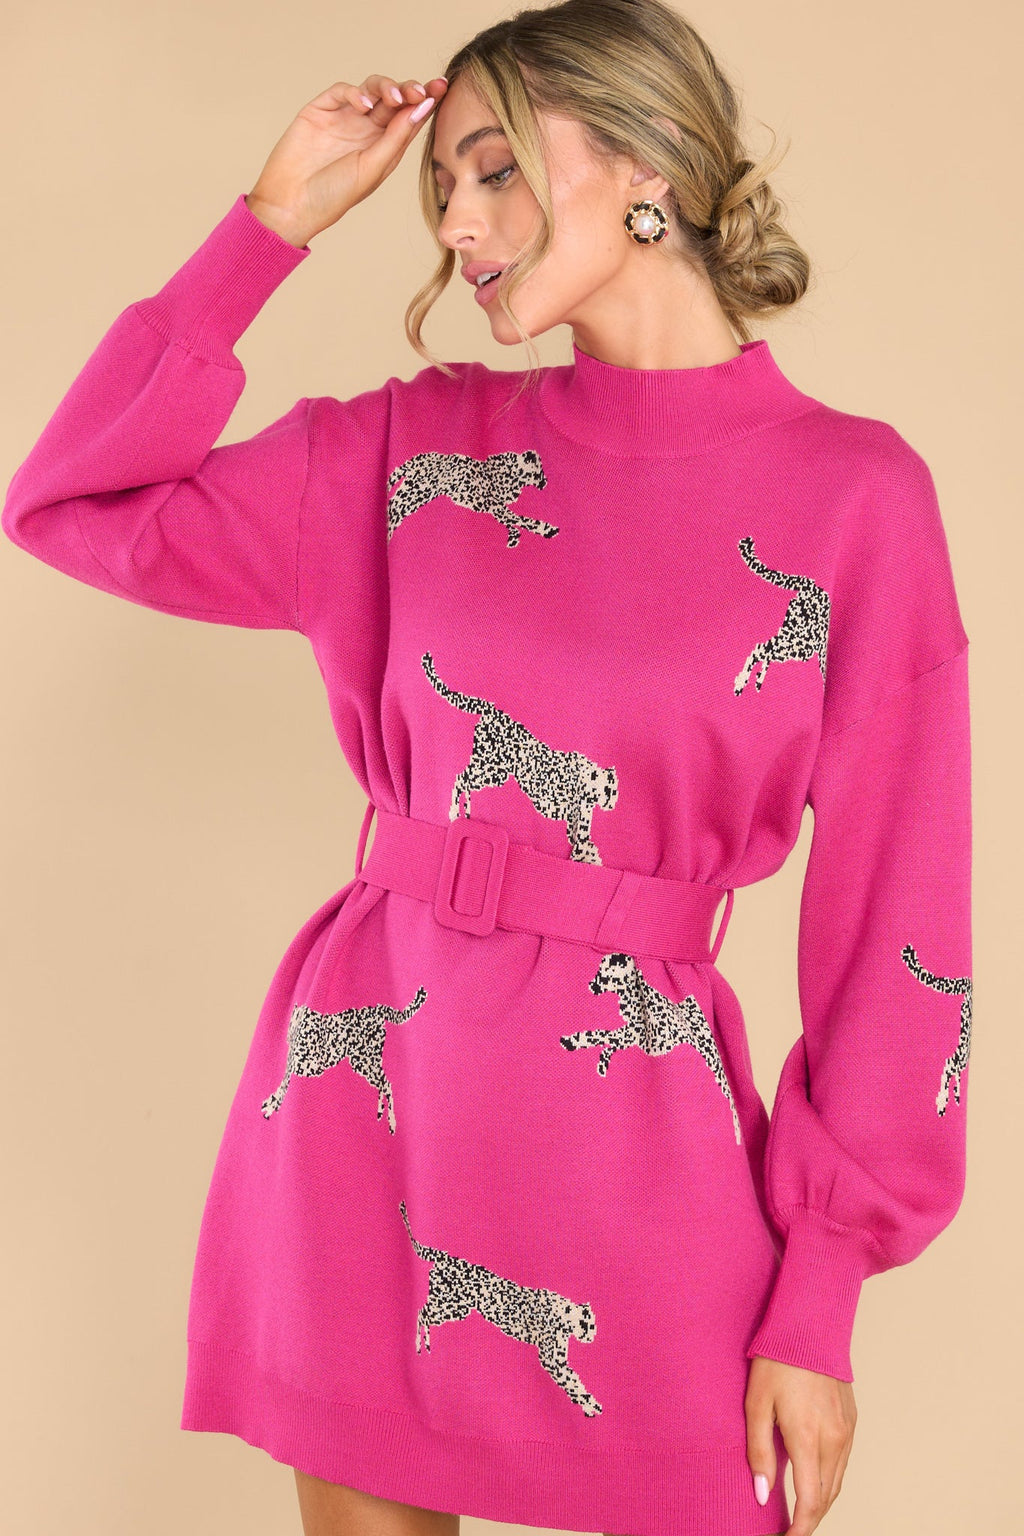 Gorgeous Oh So Bold Hot Pink Sweater Dress - All Dresses | Red Dress